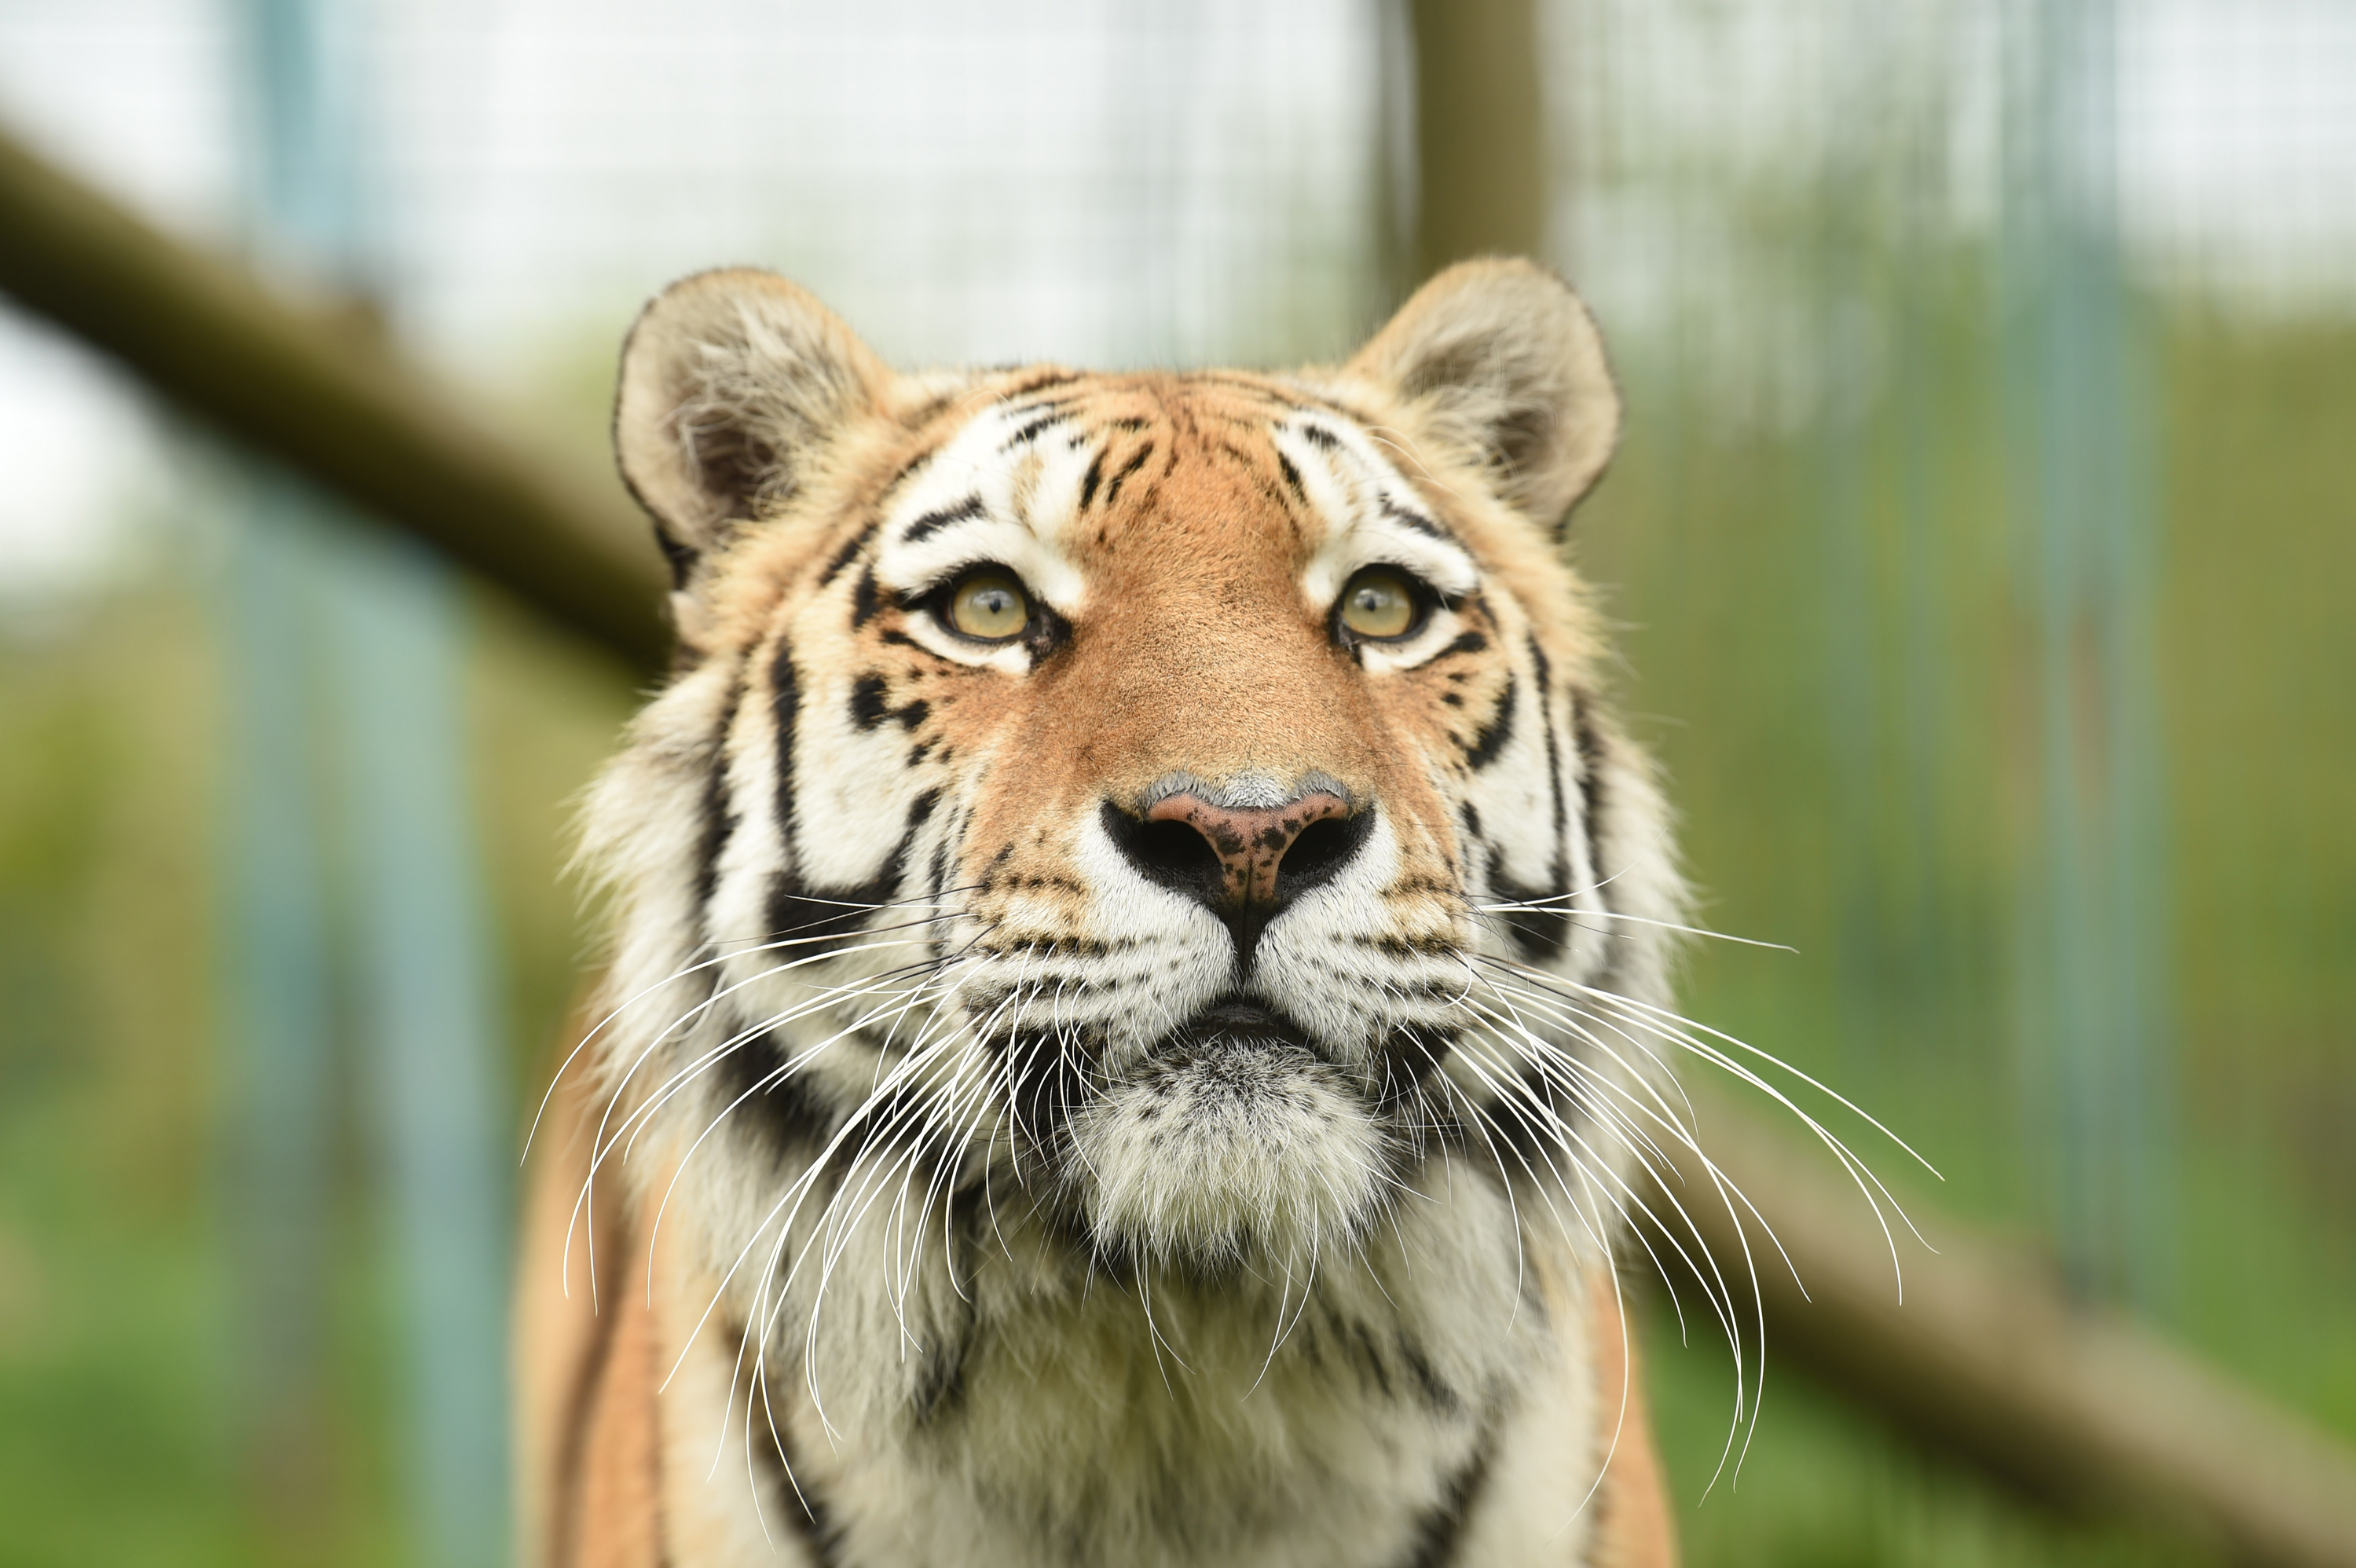 Will Newly Handed “Tiger King” Invoice Shield Cubs at Zoos? Carole Baskin Weighs In.